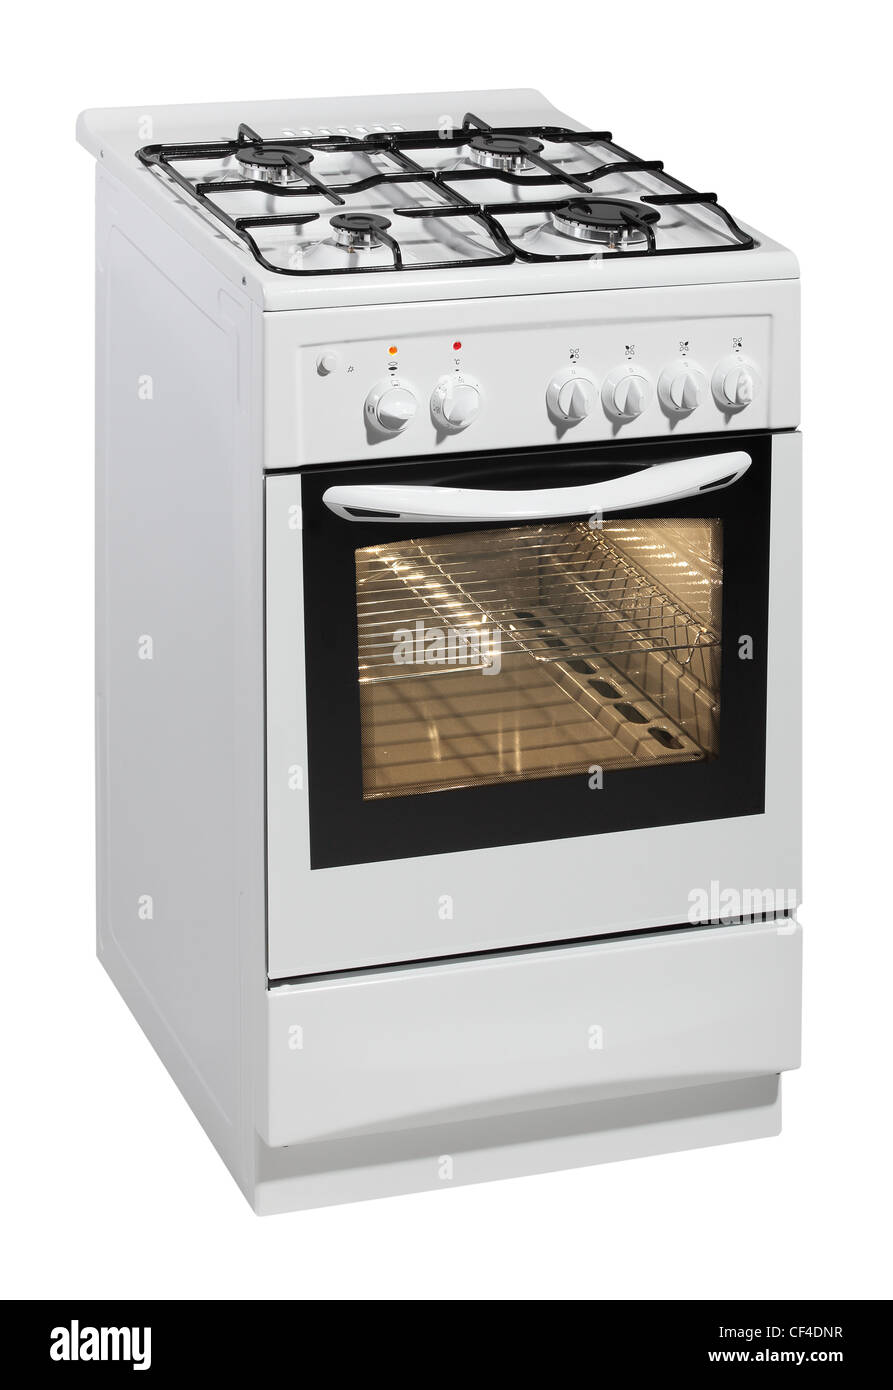 Inside the oven with light stock image. Image of electrical - 147837919